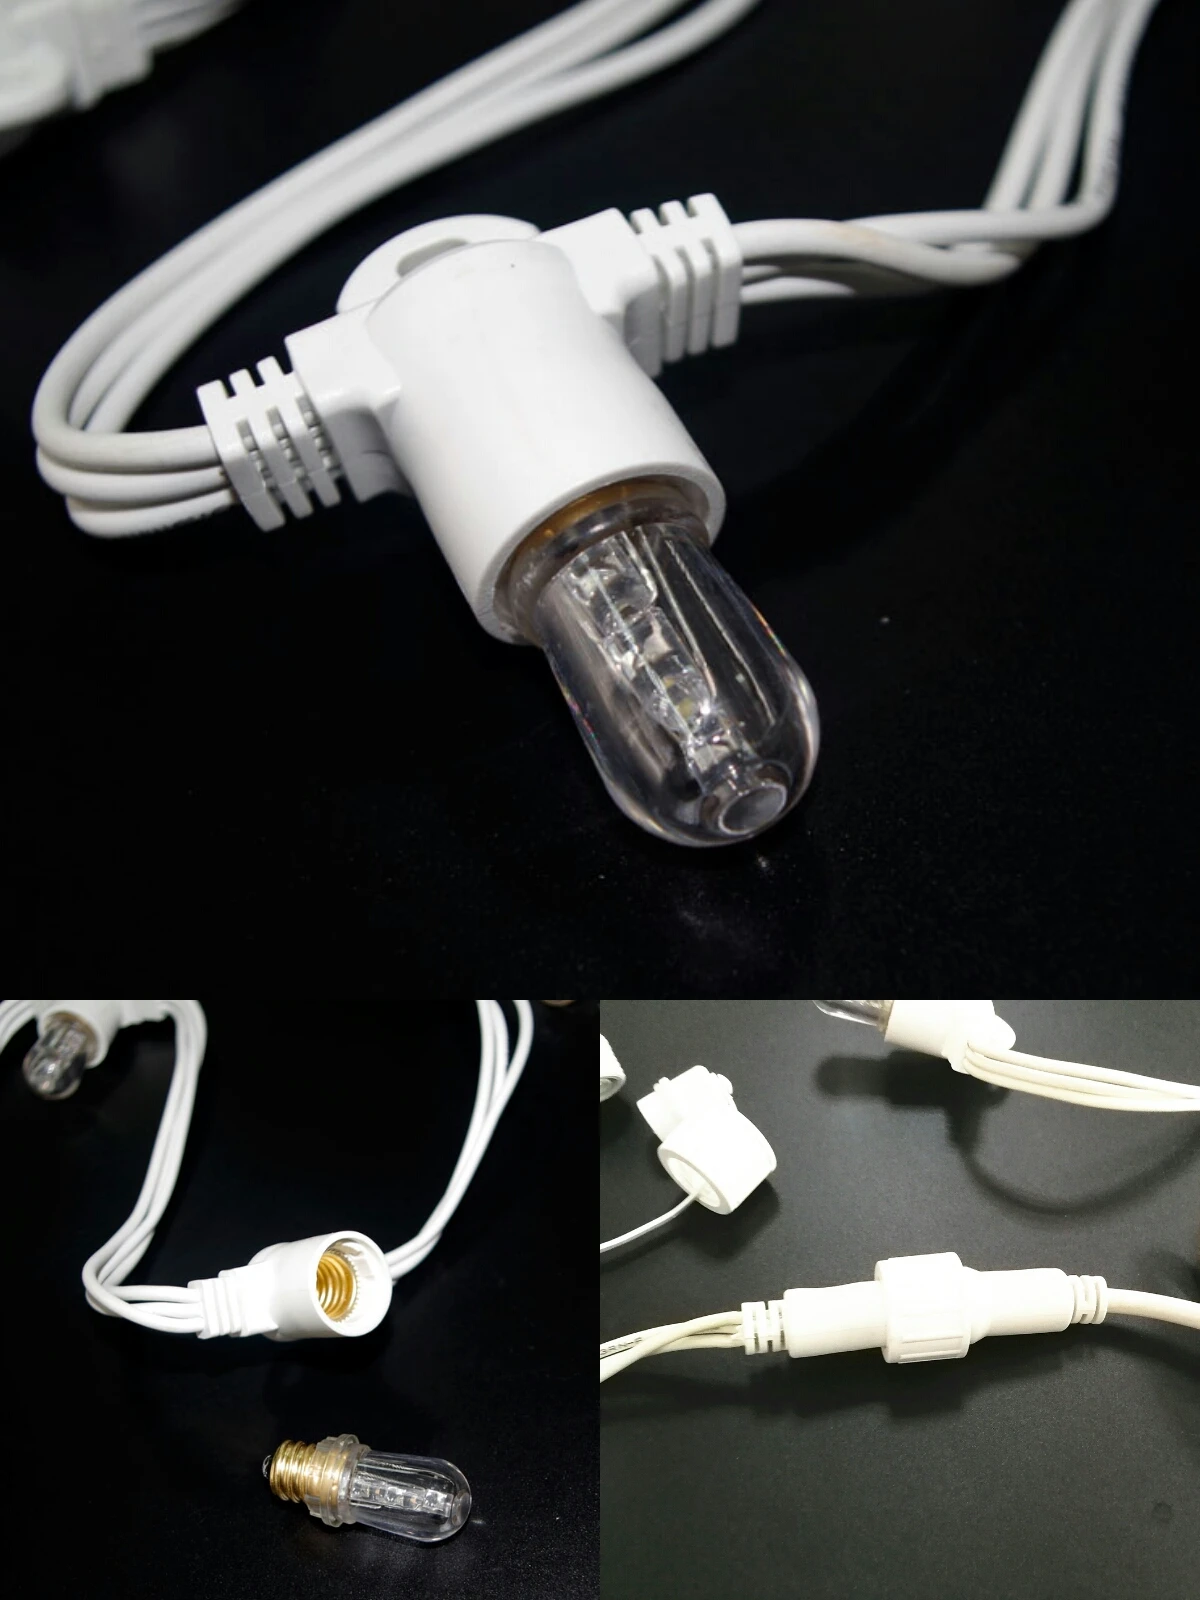 Outdoor Waterproof Connectable Rubber Cable E14 Led String Light Led Lamp Holder Socket For Christmas And Holiday Decoration